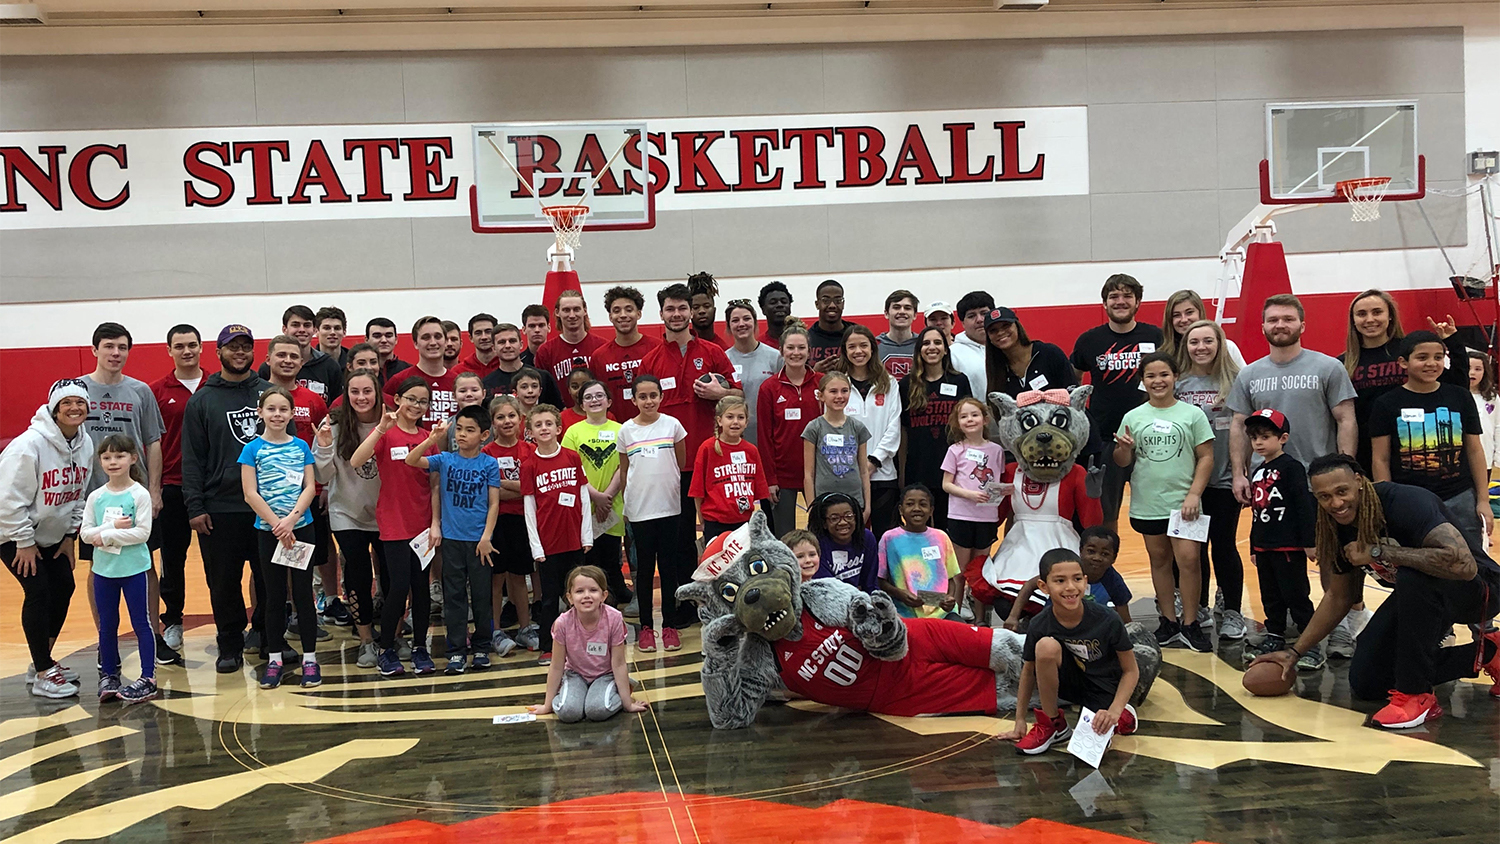 Dillard Drive and NC State students pose for group photo on basketball court